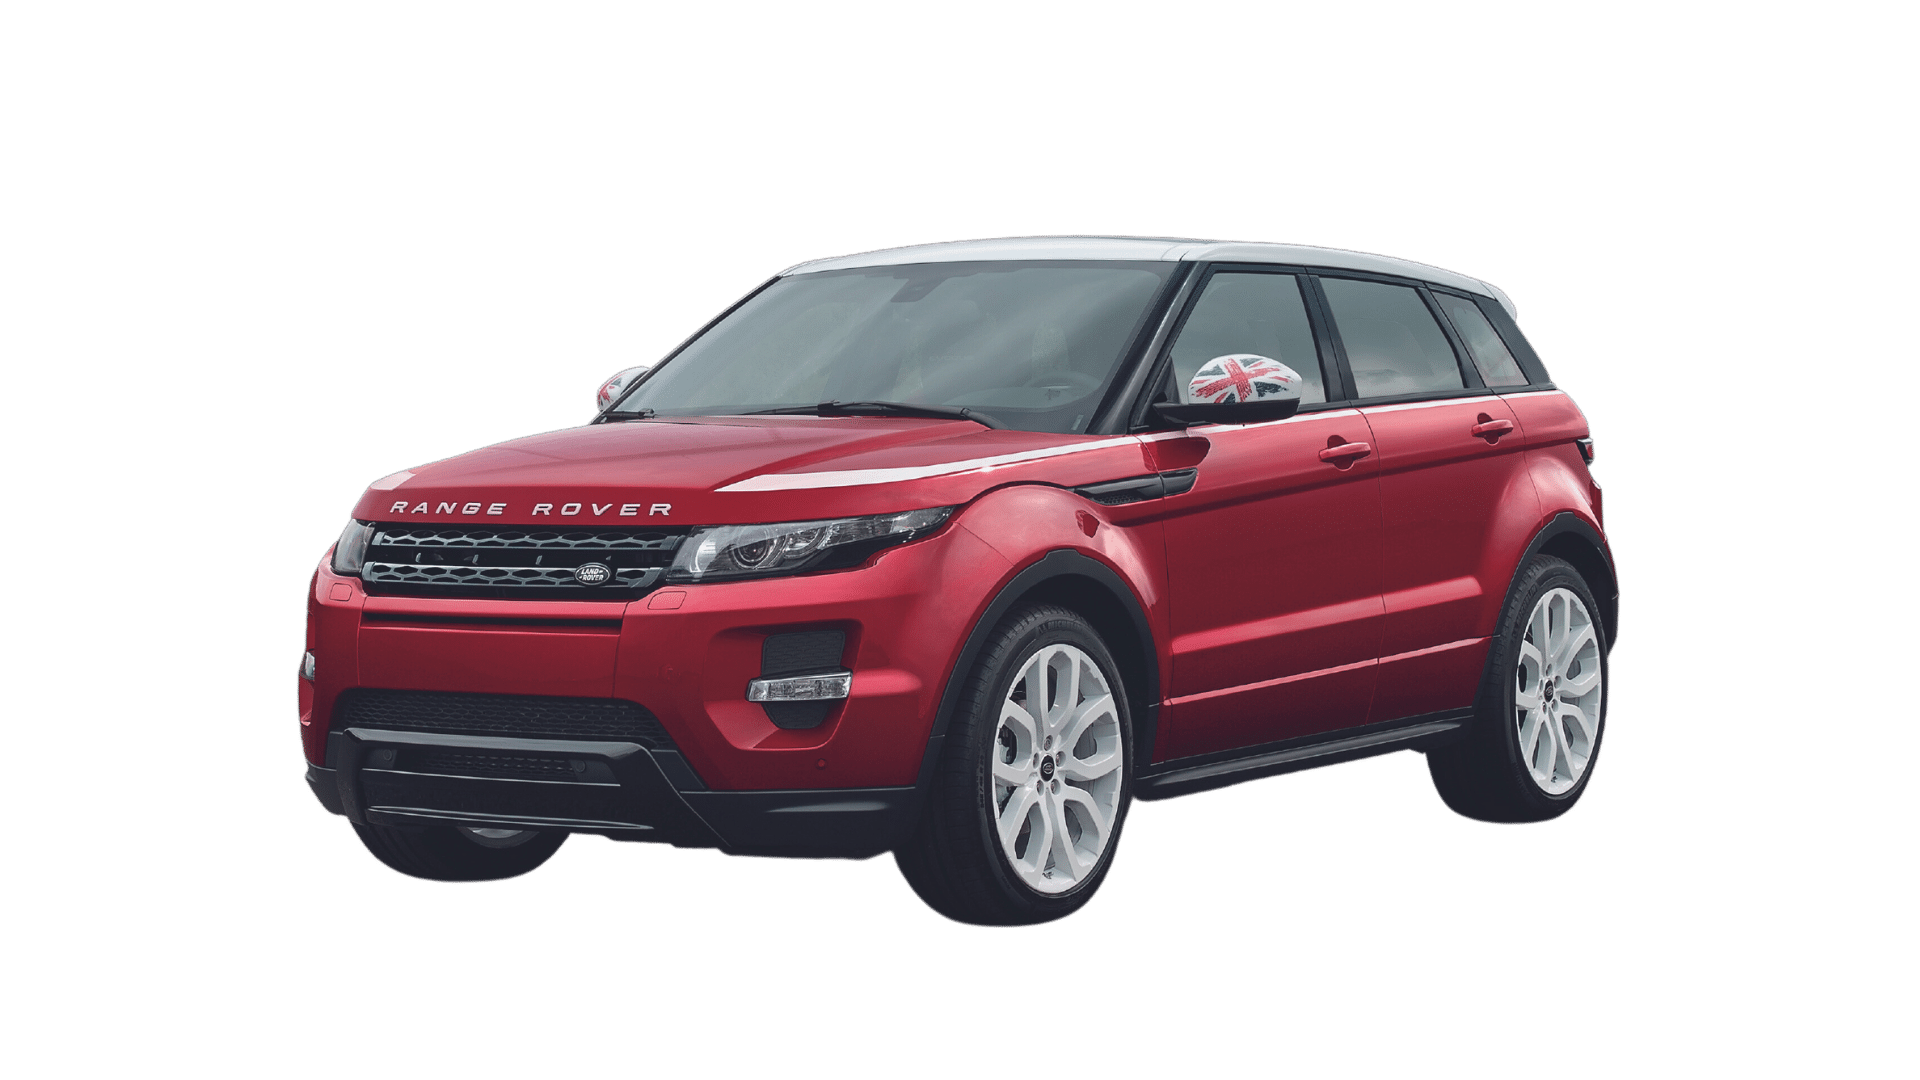 Land Rover Range Rover Evoque charging cable